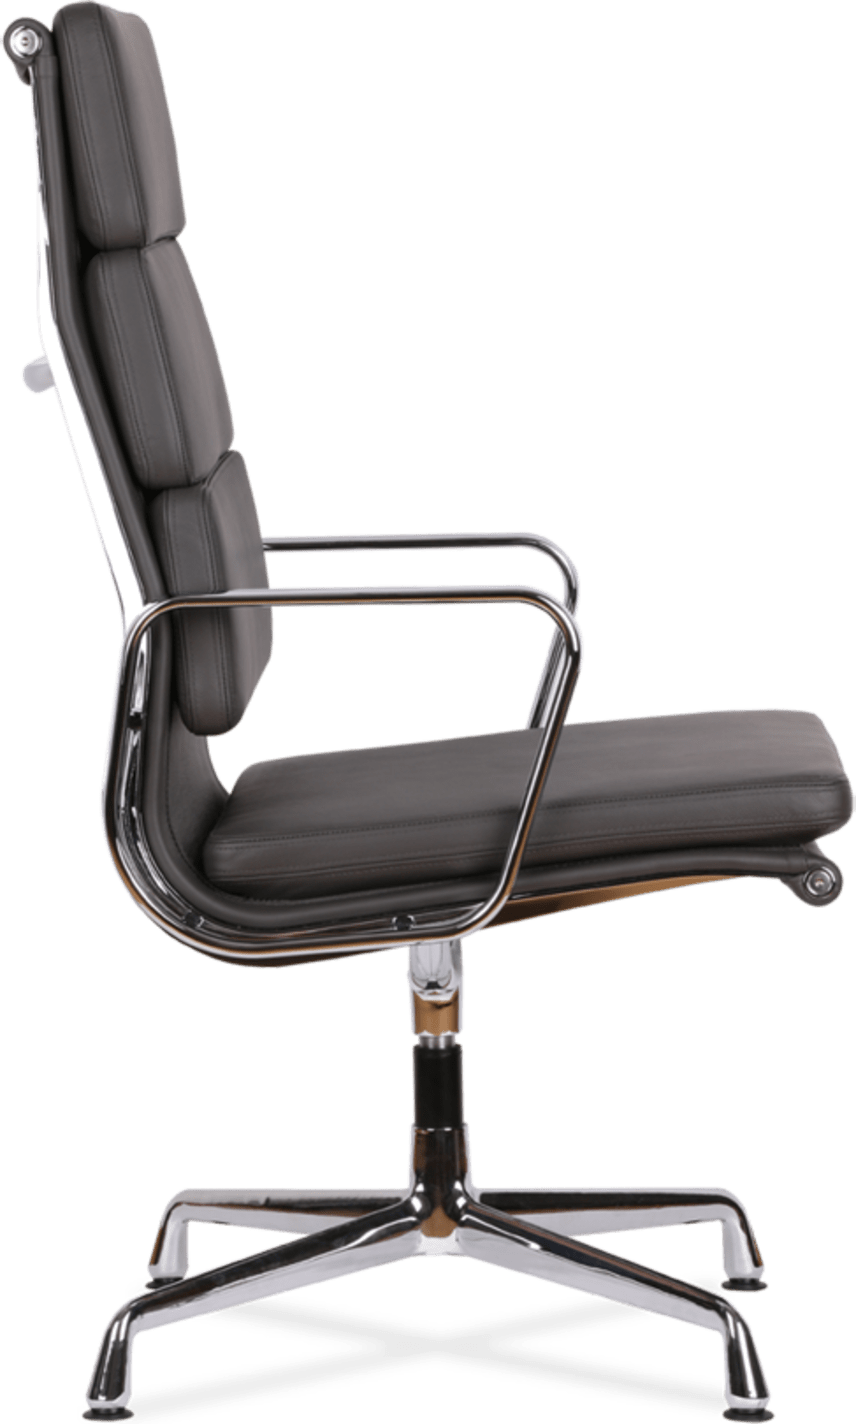 Eames Style Soft Pad Office Chair EA215 Grey image.